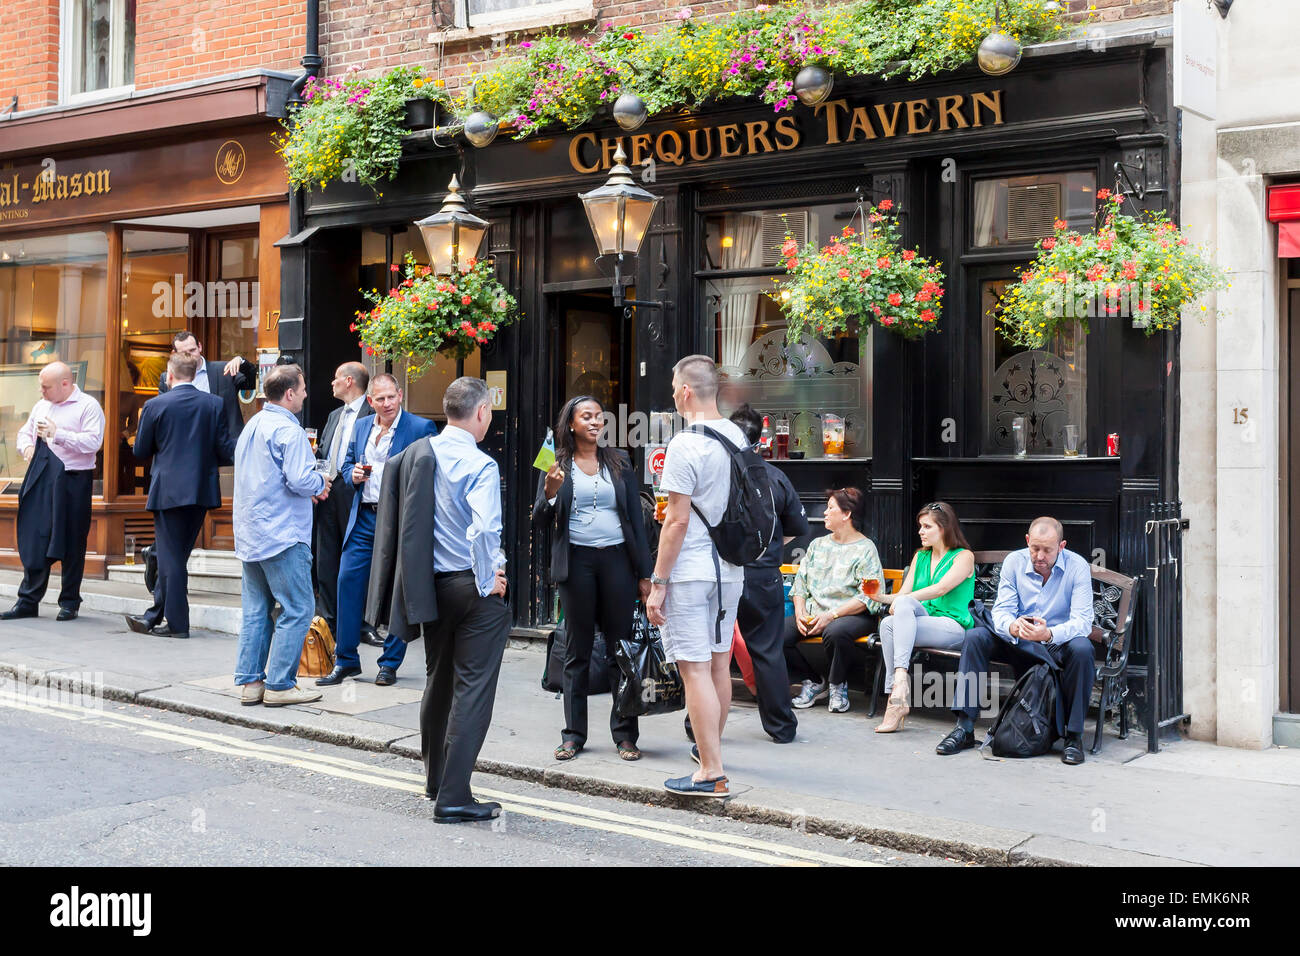 Visitors in front of a traditional pub, London, England, United Kingdom Stock Photo